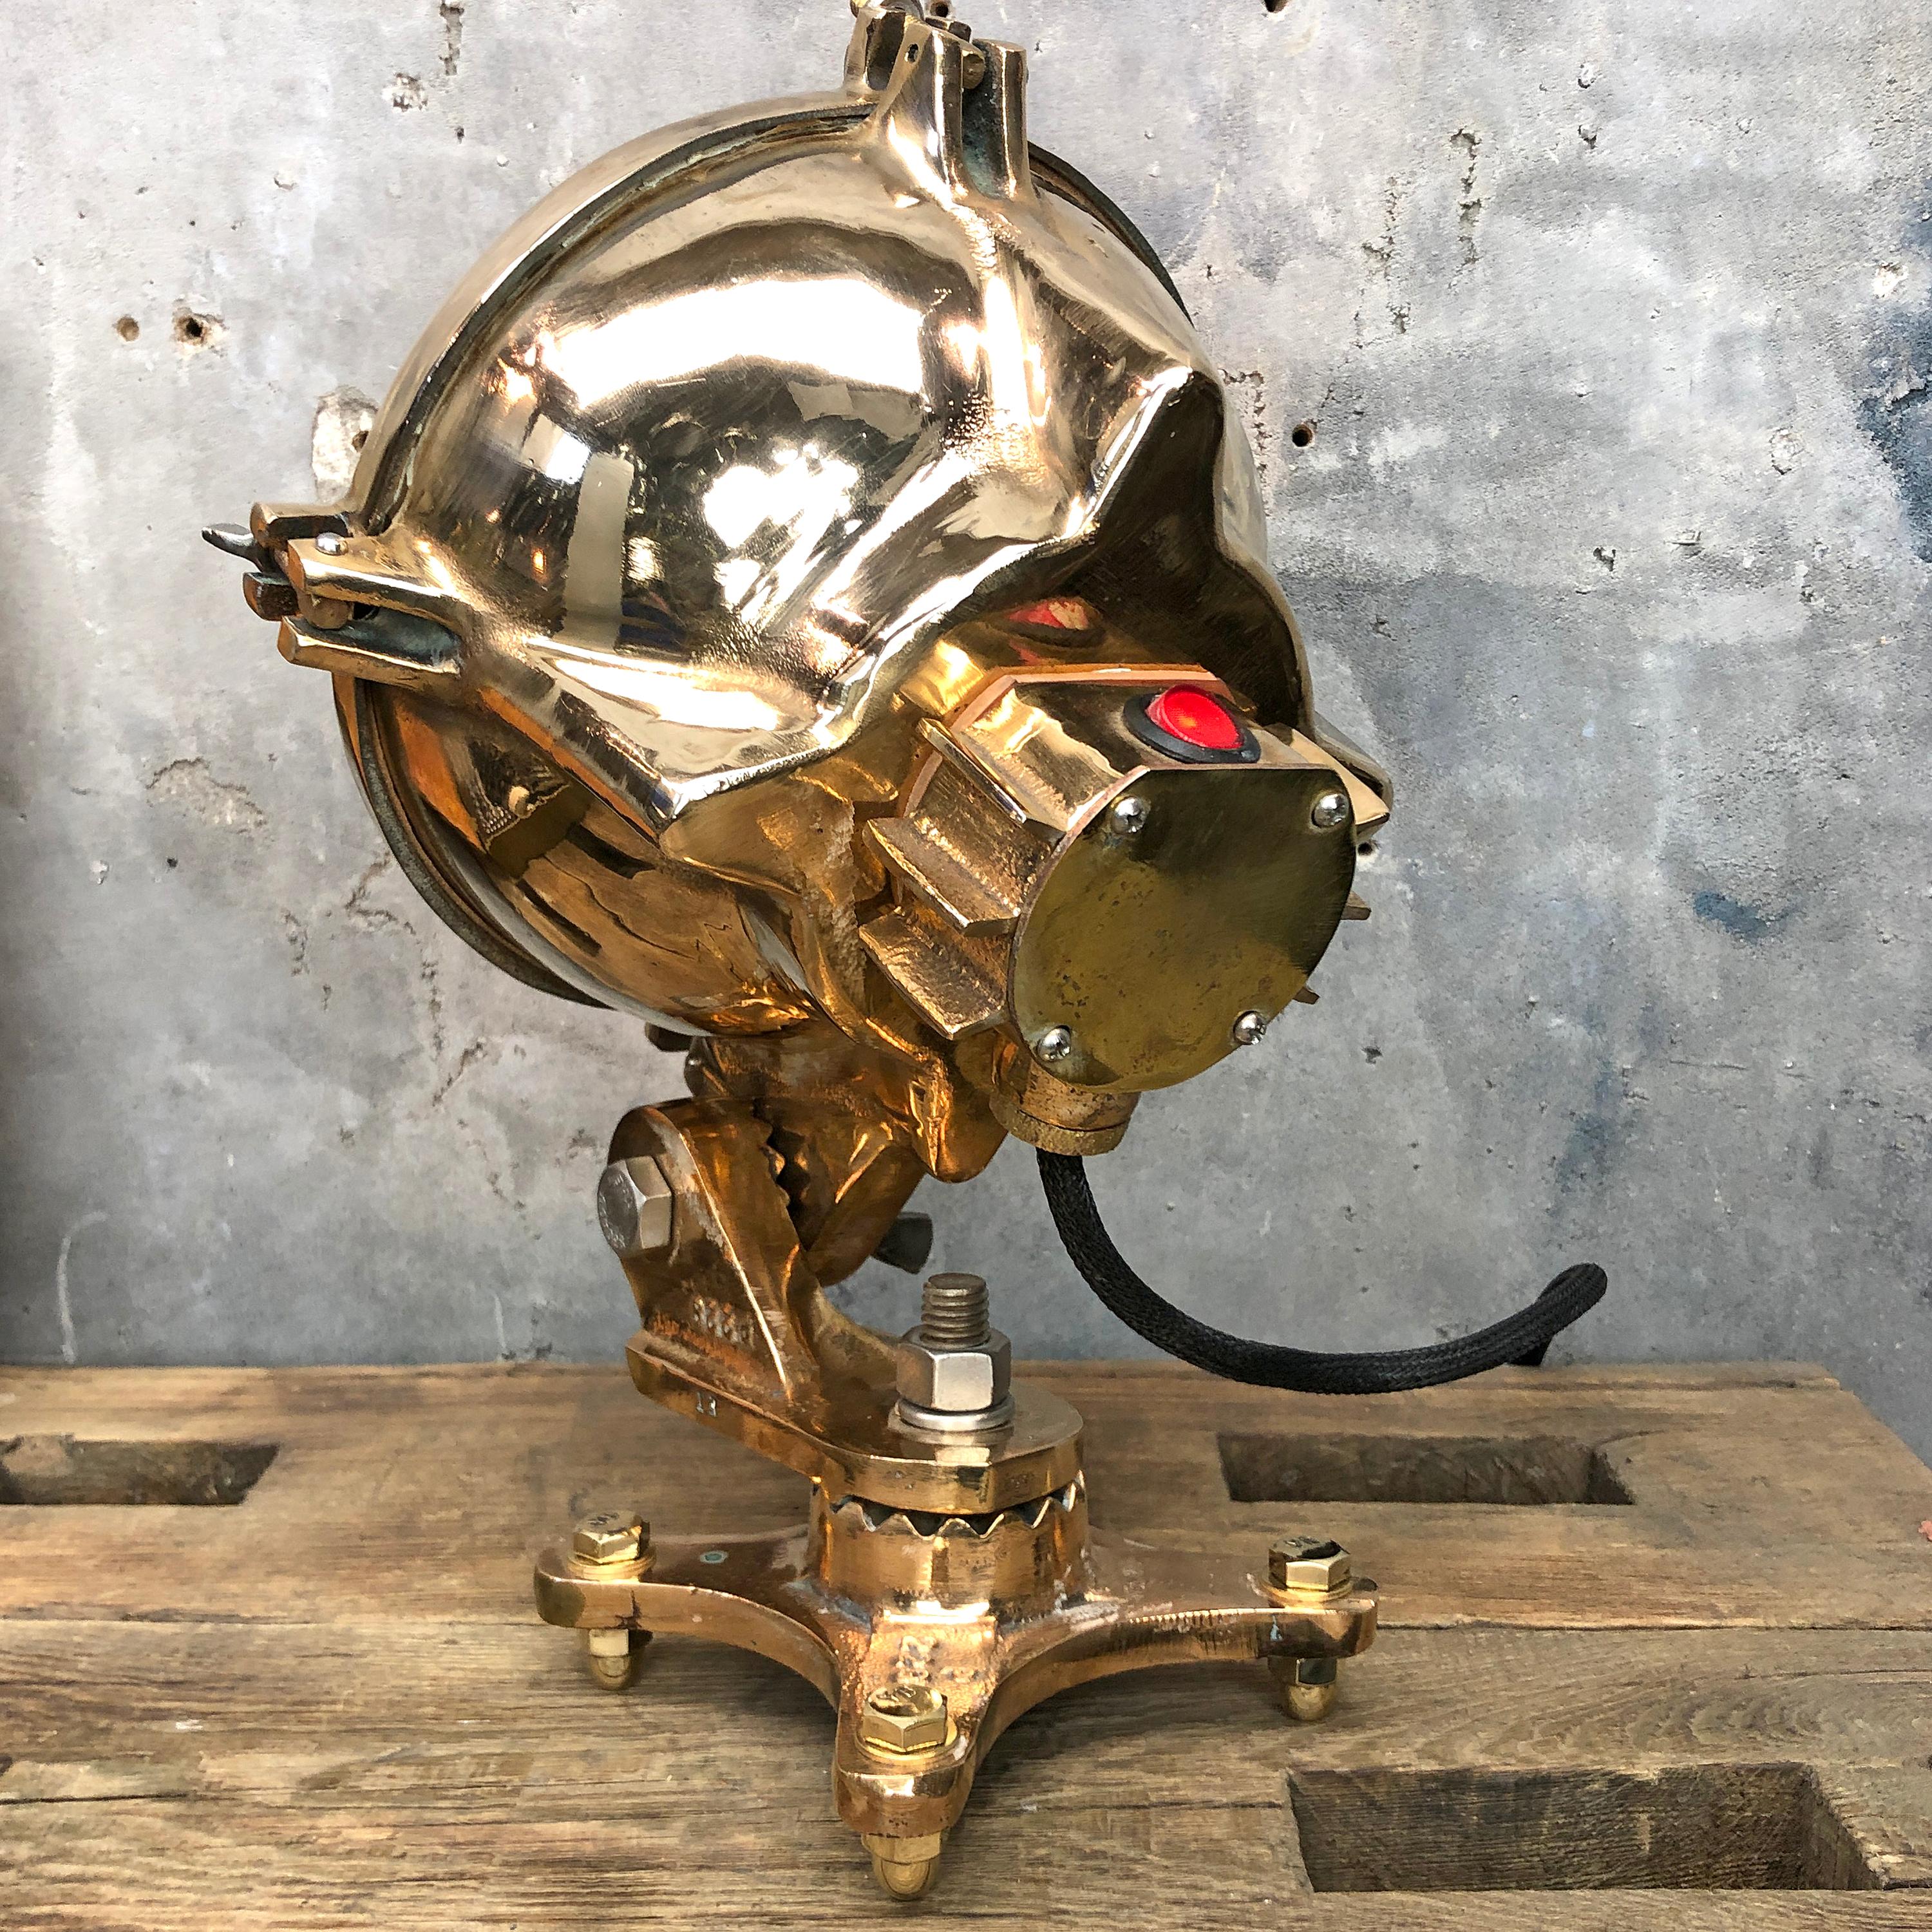 Mid-20th Century 1950 American Industrial Cast Bronze Explosion Proof Table Lamp by Crouse Hinds